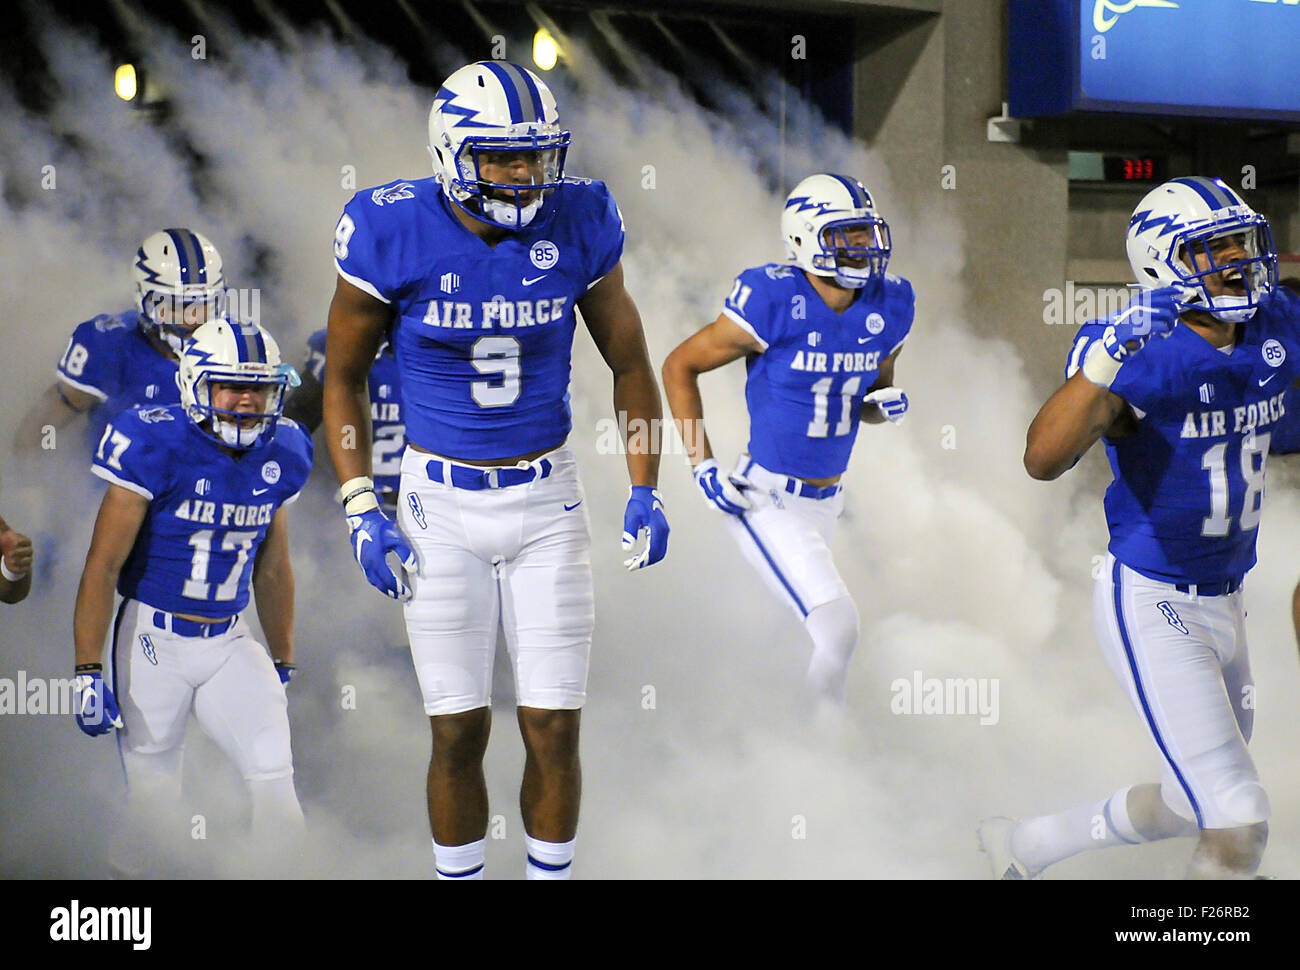 Colorado Springs, Colorado, USA. 12th Sep, 2015. Air Force Falcons enter the stadium prior to Mountain West Conference action between the San Jose State Spartans and the Air Force Academy Falcons at Falcon Stadium, U.S. Air Force Academy, Colorado Springs, Colorado. Air Force defeats San Jose State 37-16. © csm/Alamy Live News Stock Photo